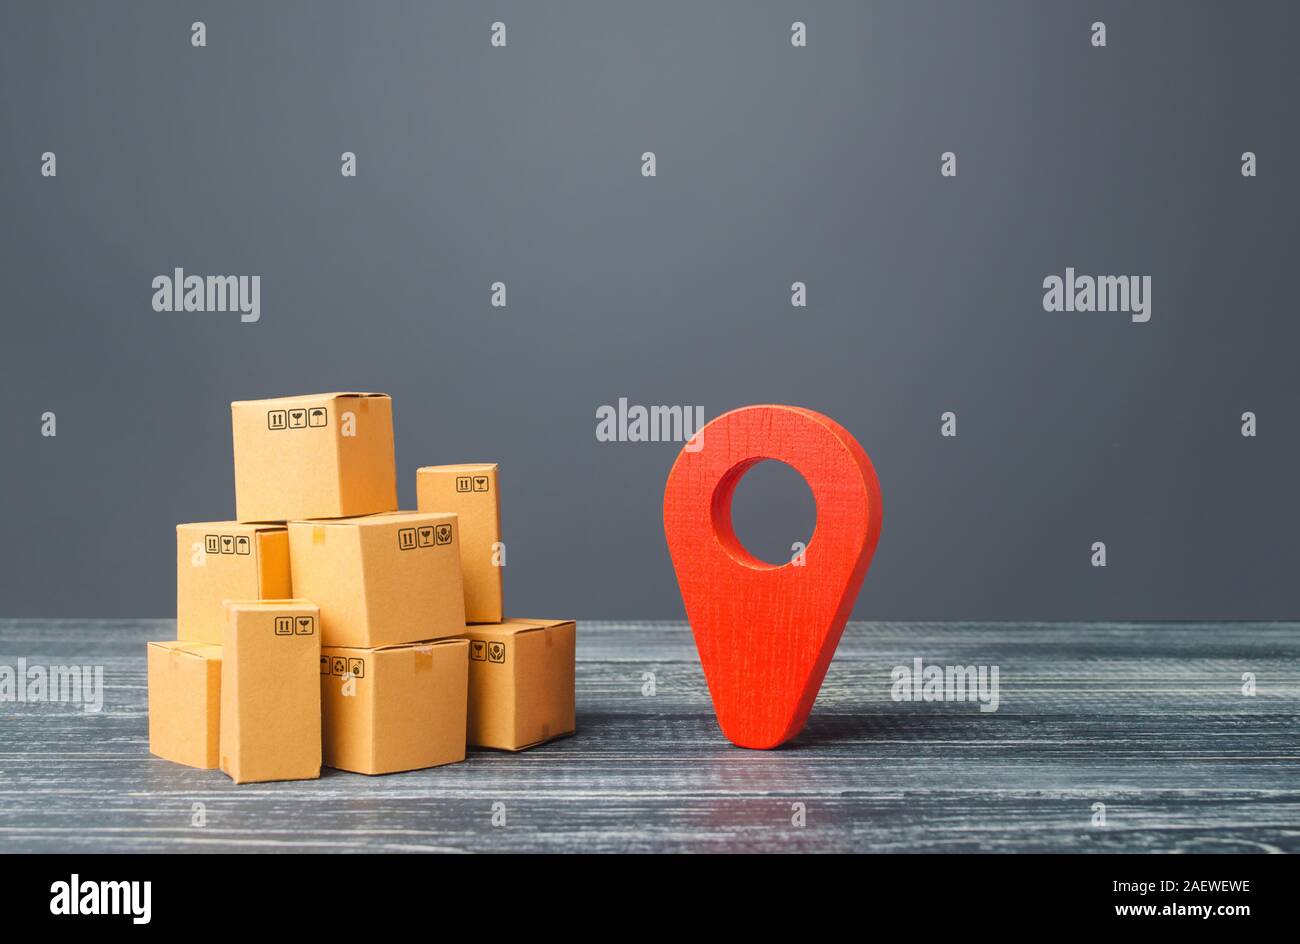 Red location pointer geolocation symbol and cardboard boxes. Distribution delivery of goods, freight transportation shipment. Logistics and warehousin Stock Photo